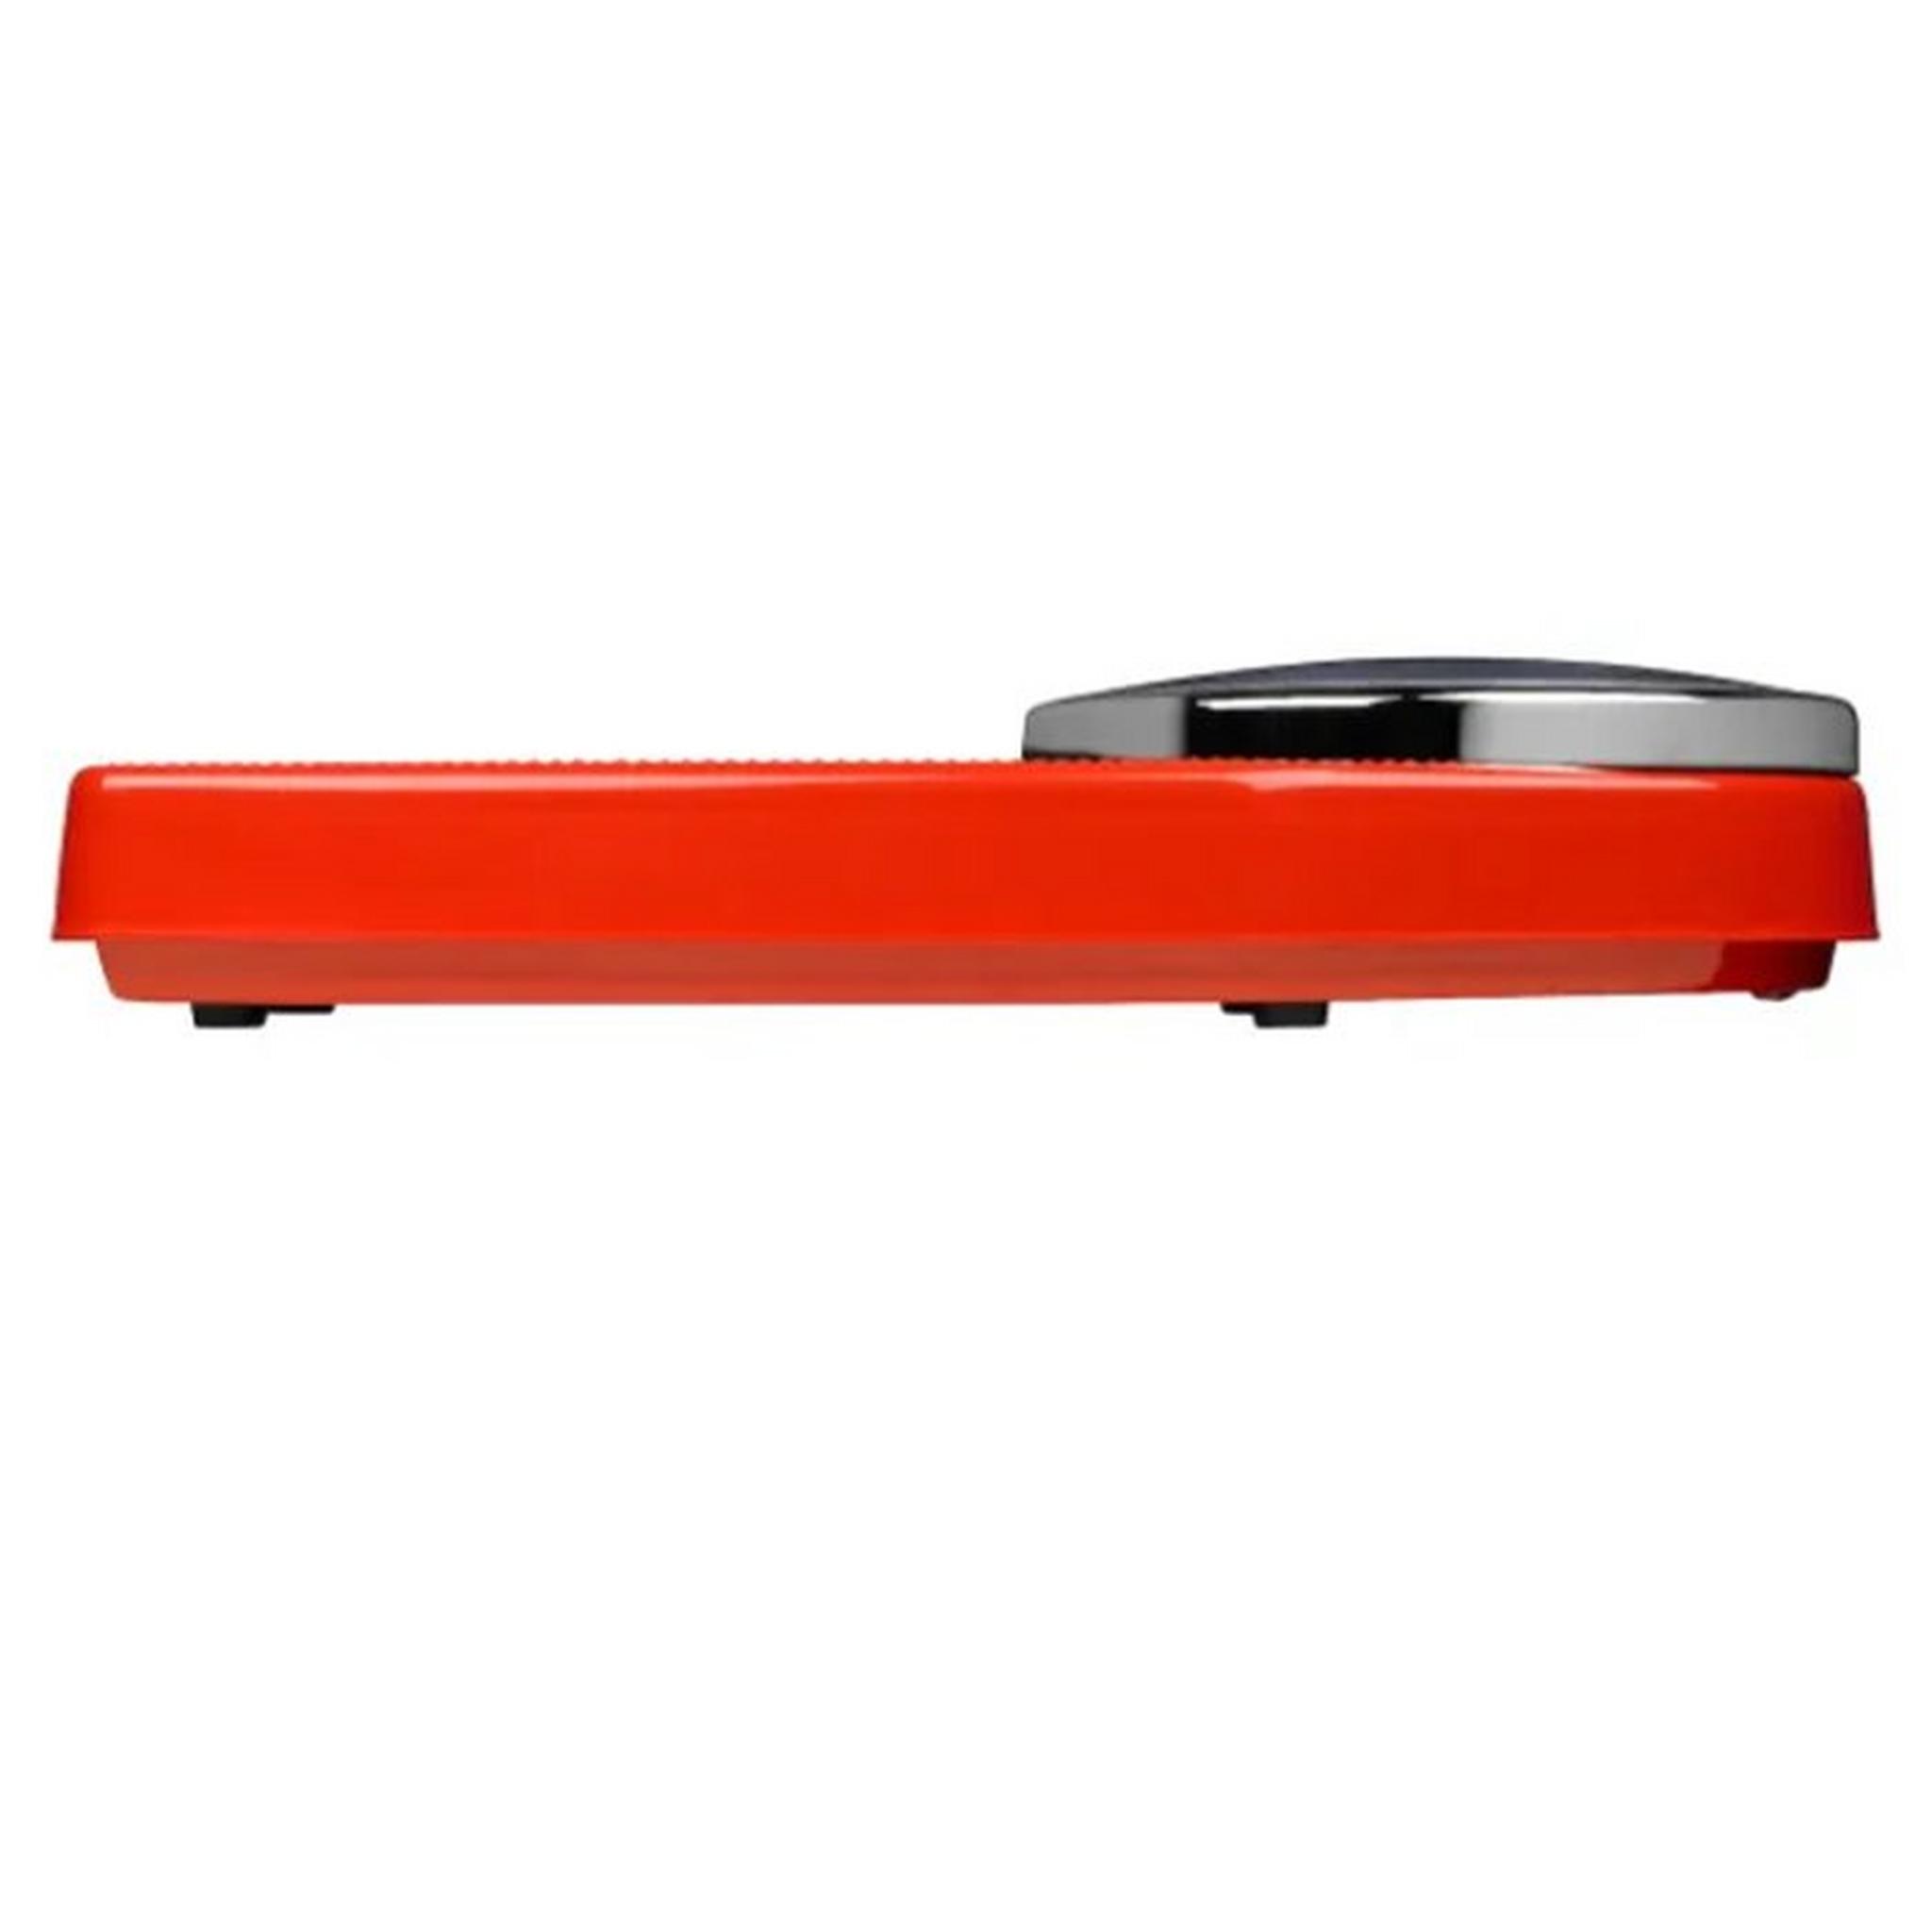 Medisana PSD Personal Scale, 40498 - Red